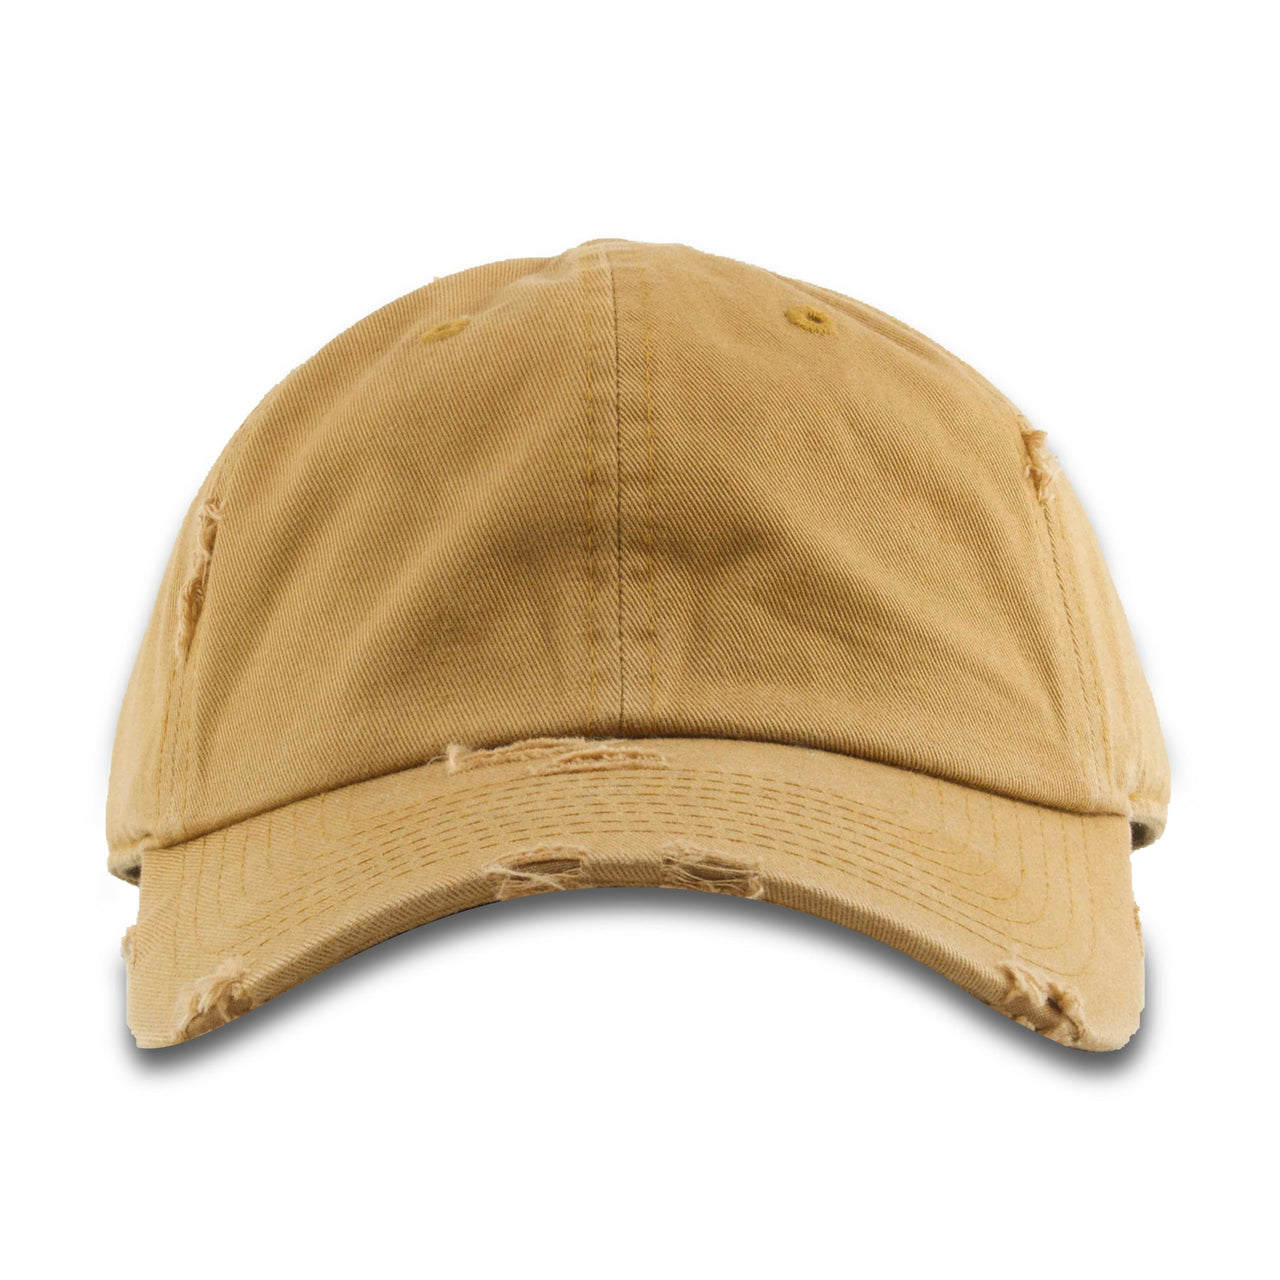 The blank distressed timberland dad hat has a soft crown and a bent brim